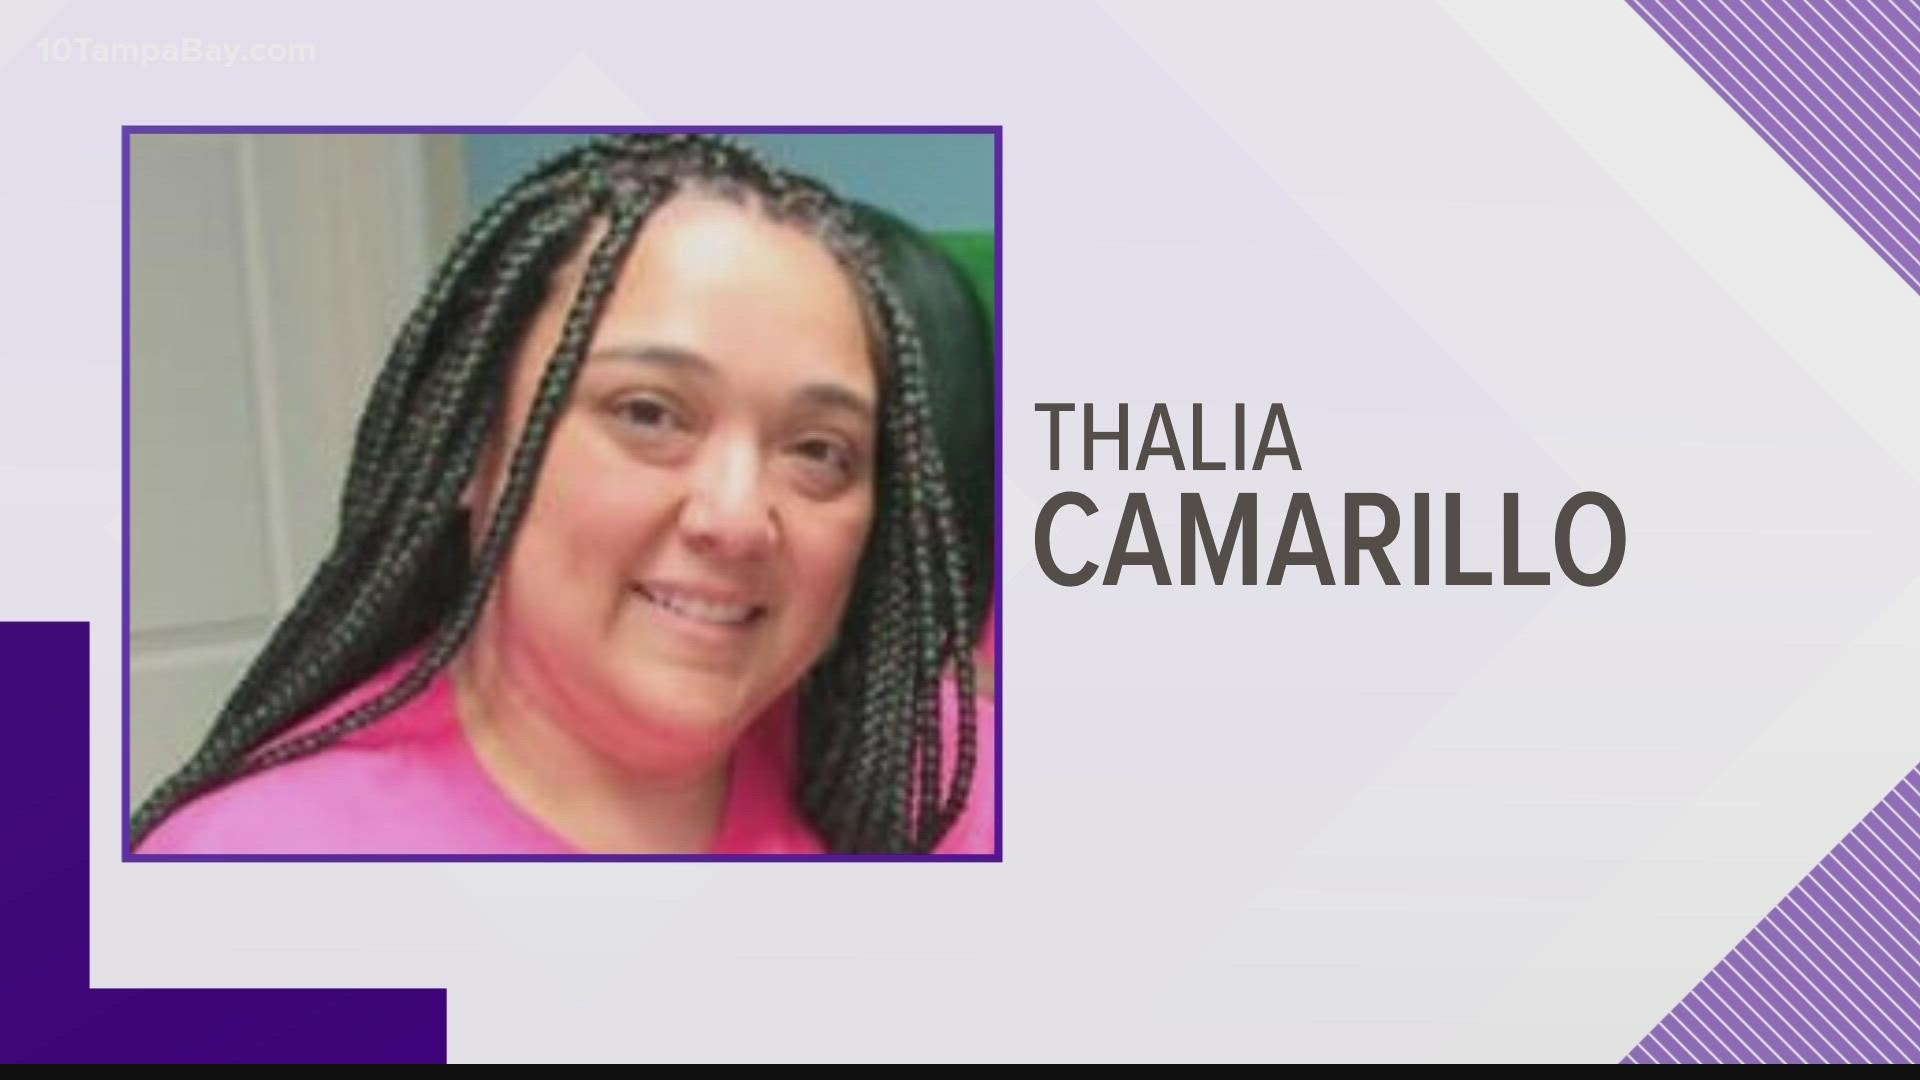 Police say security camera footage showed Thalia Camarillo, 42, hitting the infant with an open hand and twisting the baby's leg.